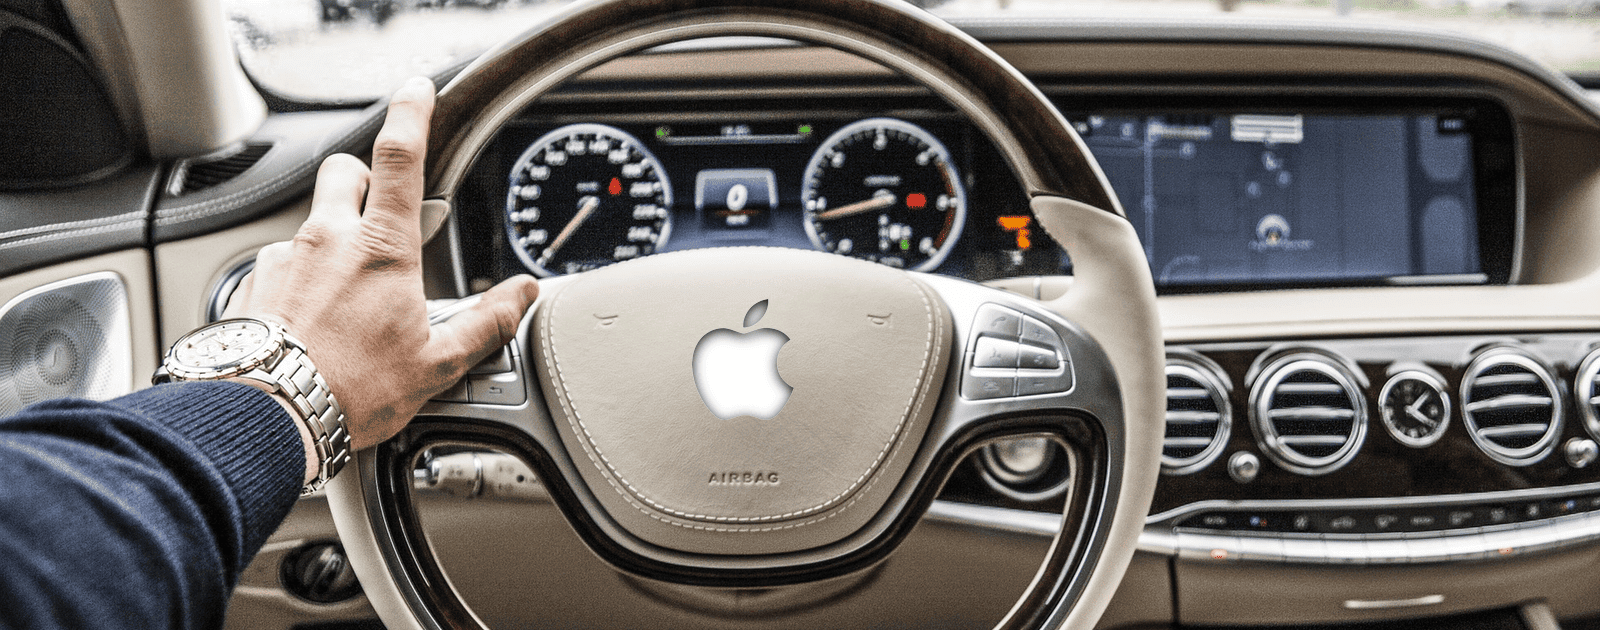 BMW Could be Good Apple Car Partner, Say Analysts